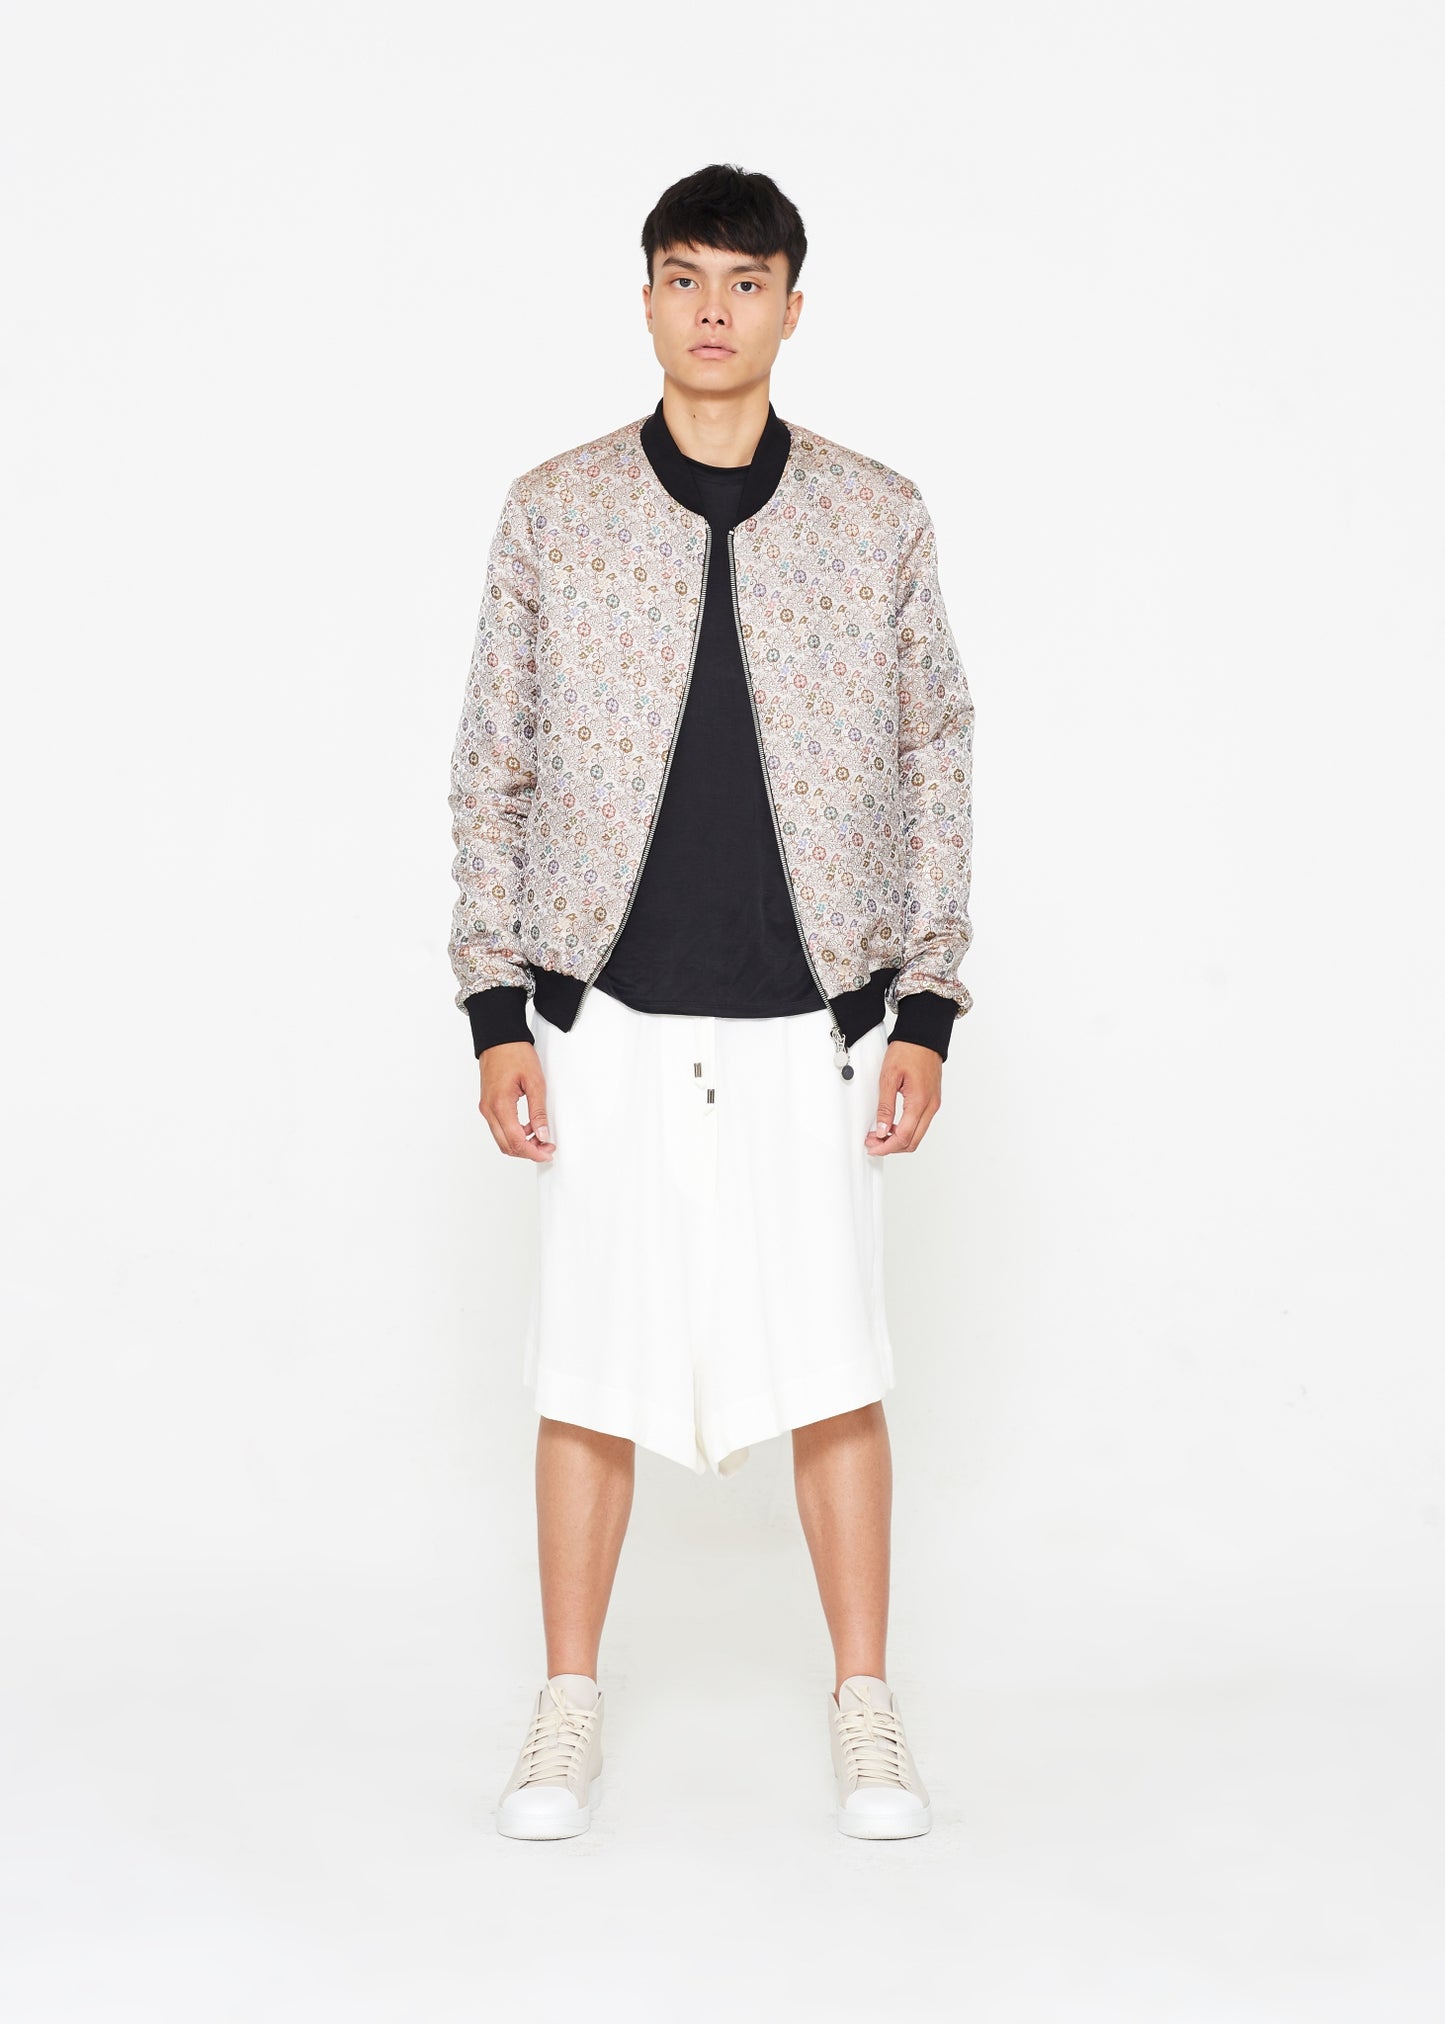 "The Limited Edition Crepe Bomber" in Silver Floral